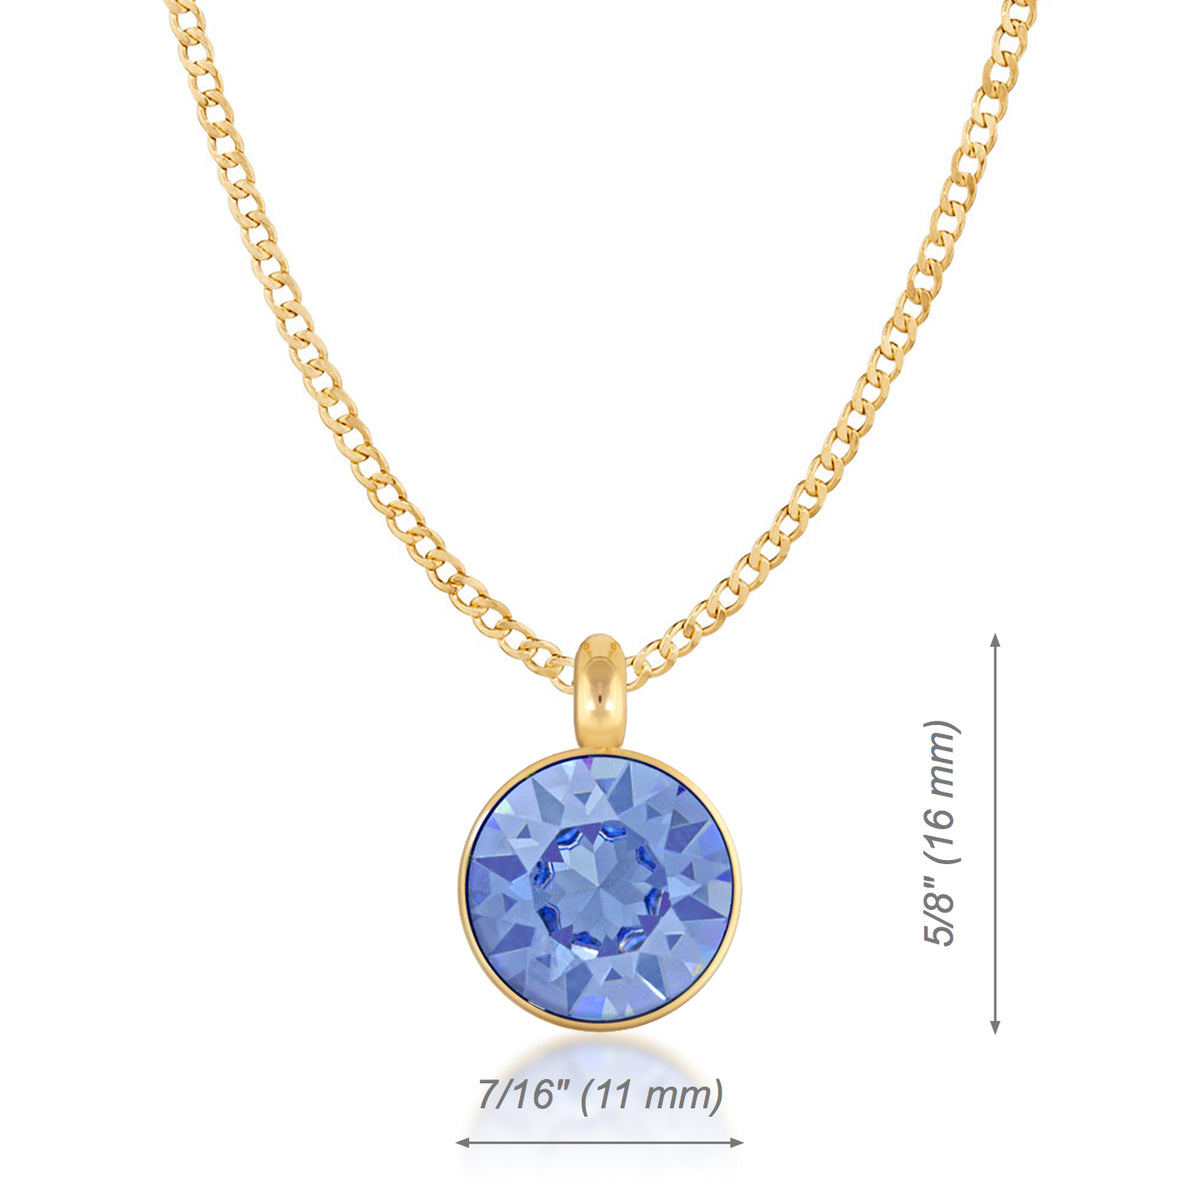 Bella Pendant Necklace with Blue Light Sapphire Round Crystals from Swarovski Gold Plated - Ed Heart